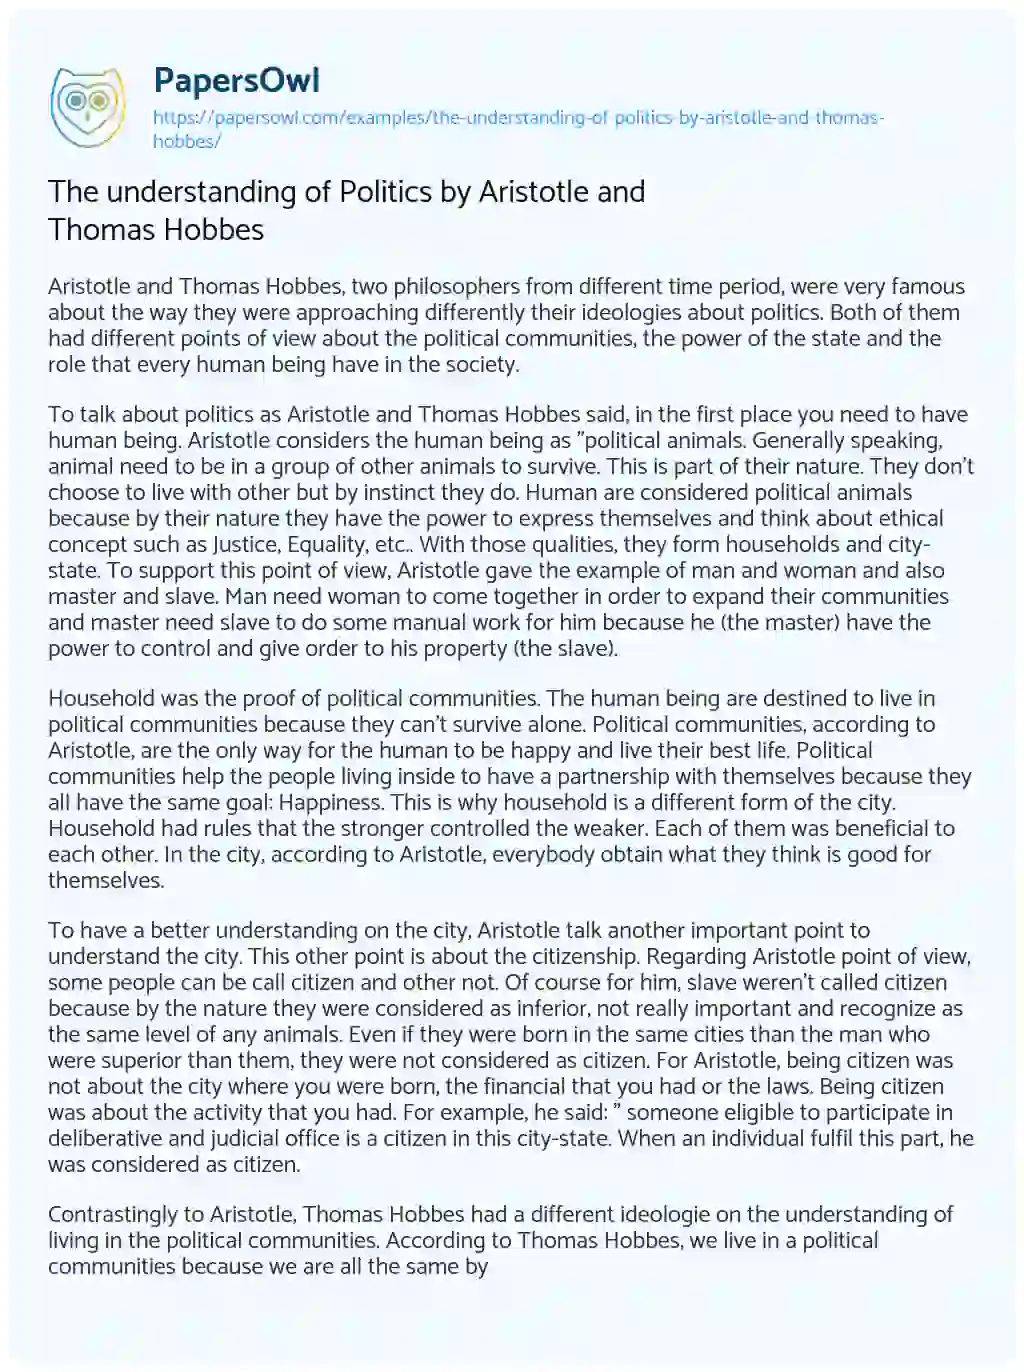 Essay on The Understanding of Politics by Aristotle and Thomas Hobbes